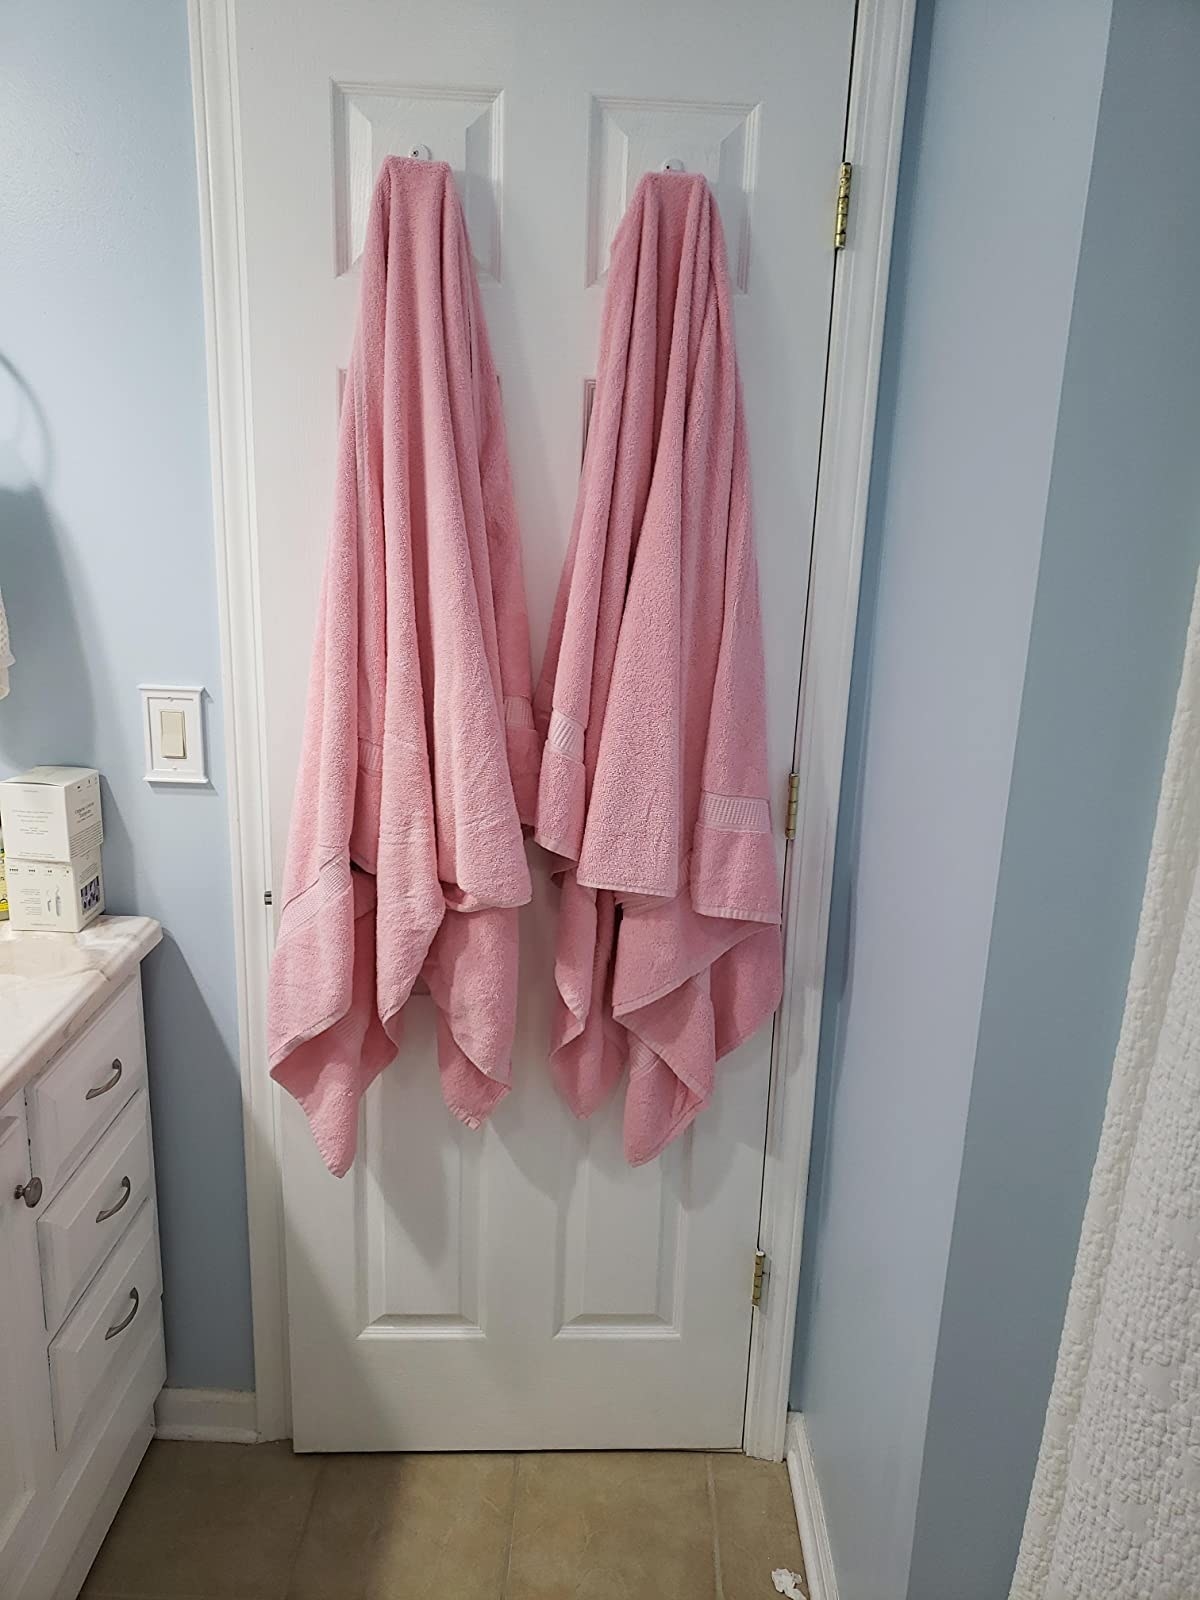 Two large pink towels on a door